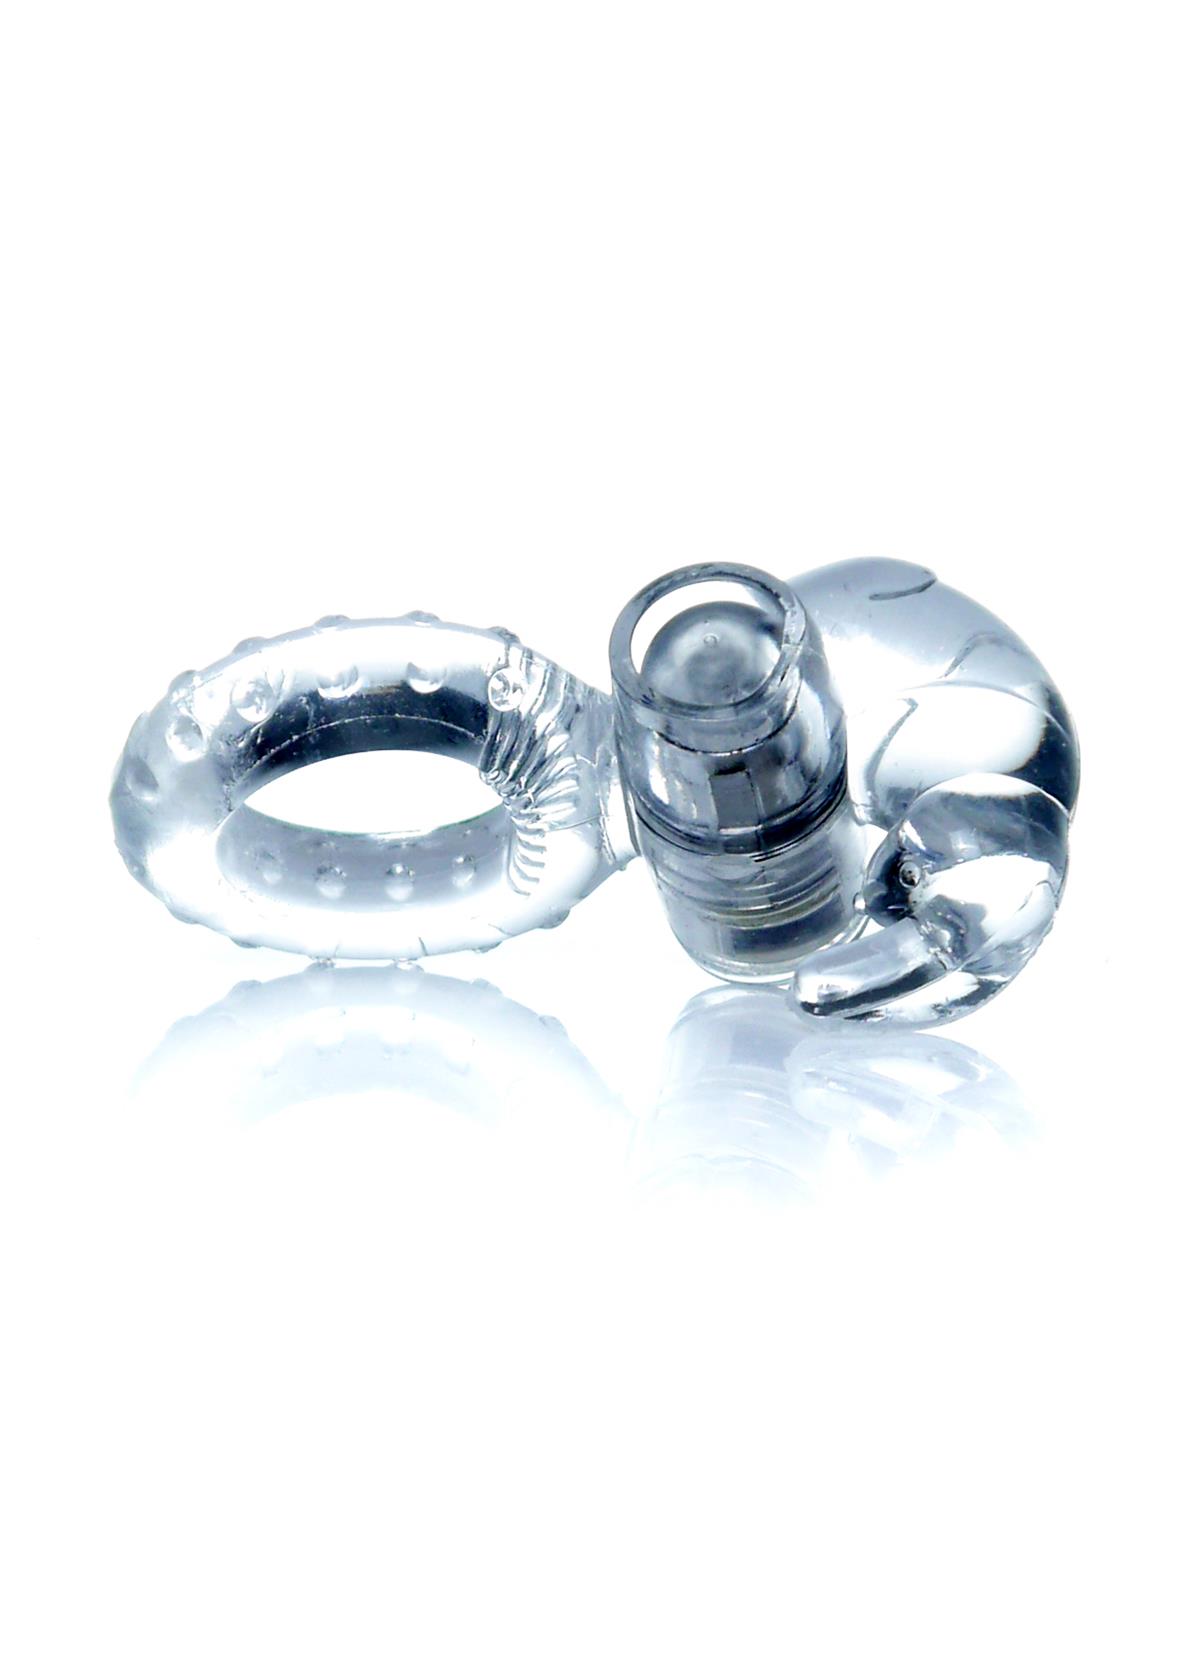 Bossoftoys - 67-00049 - Rabbit Vibrating Cockring  - 7,5 cm - Clear - batteries included - packed in strong blister